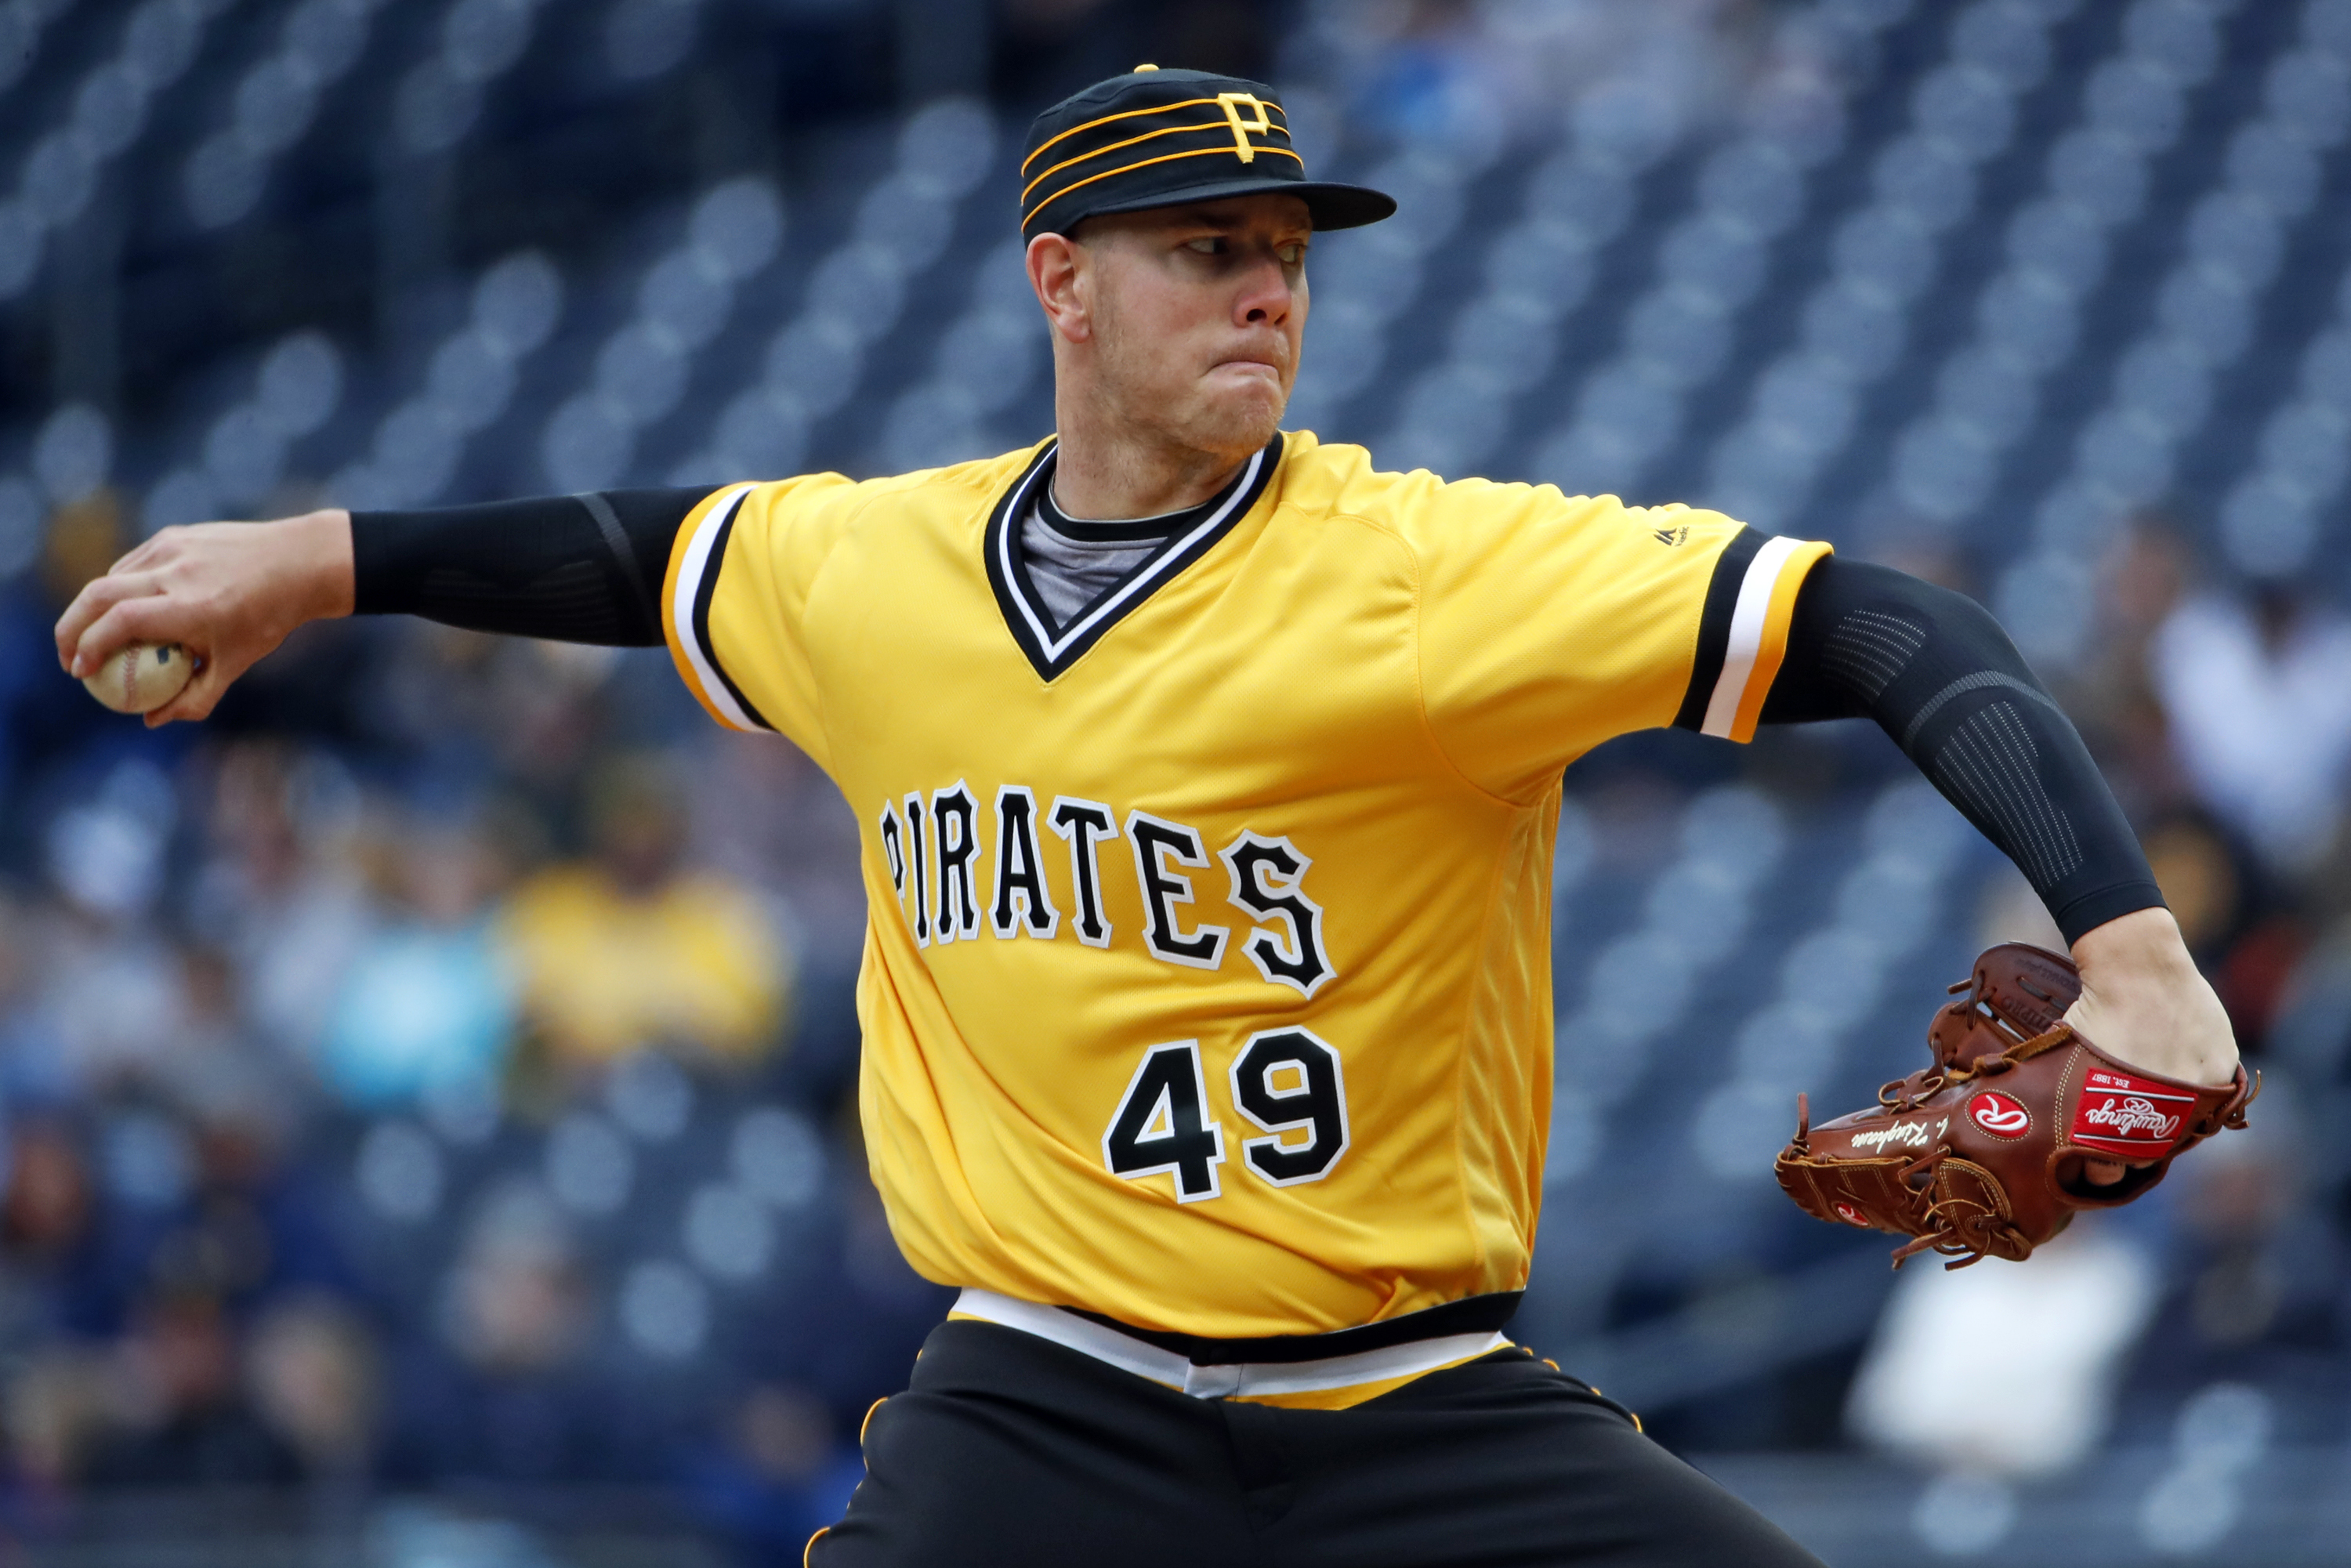 Pirates' Kingham loses perfect game in 7th in his MLB debut